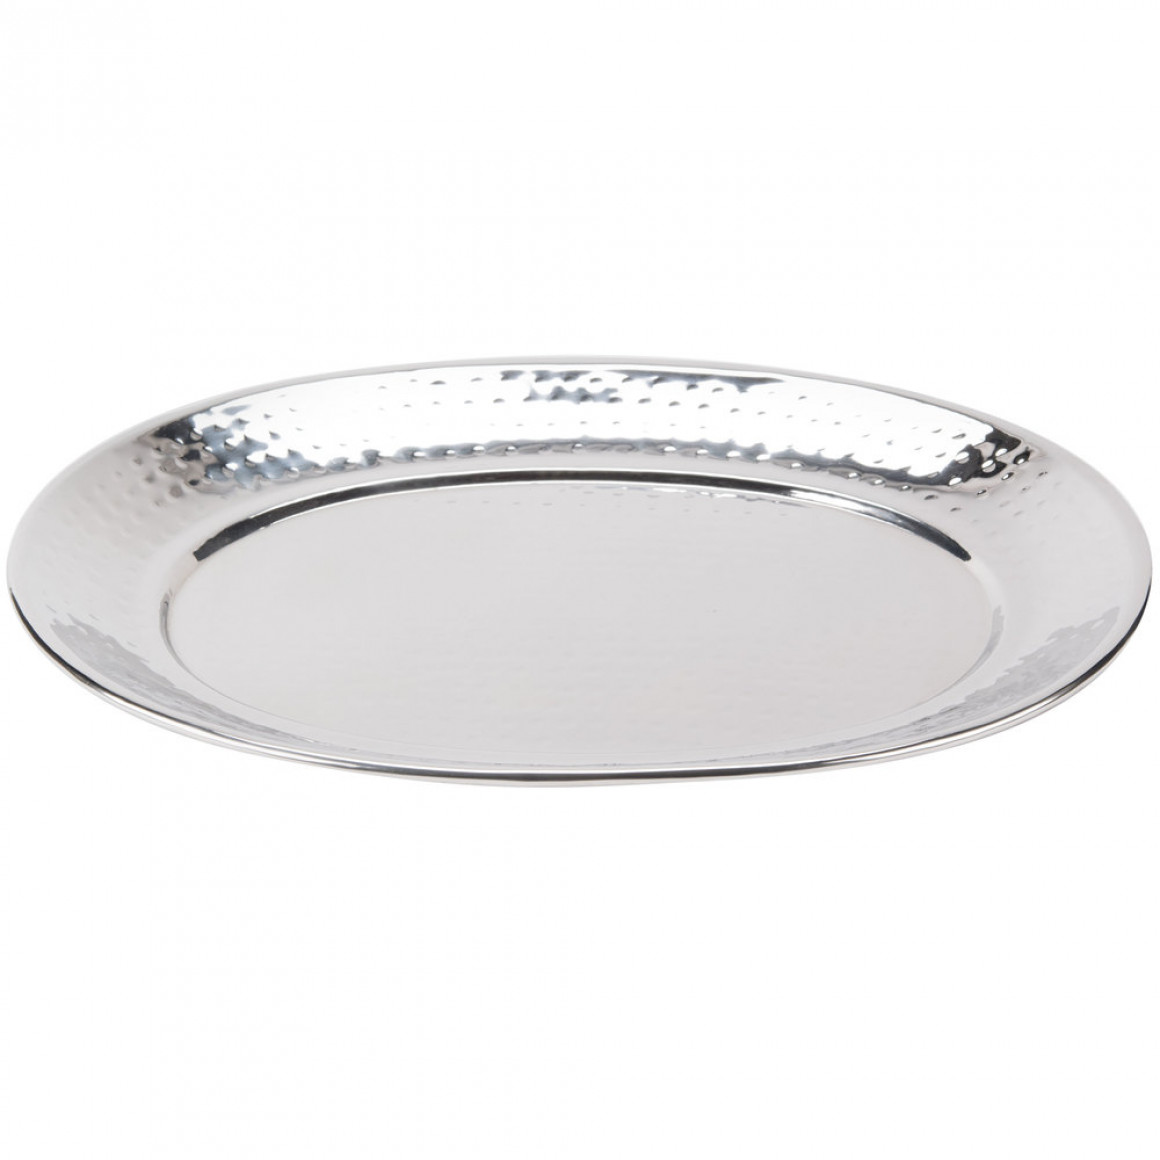 STAINLESS STEEL, HAMMERED TRAY, OVAL, BIG